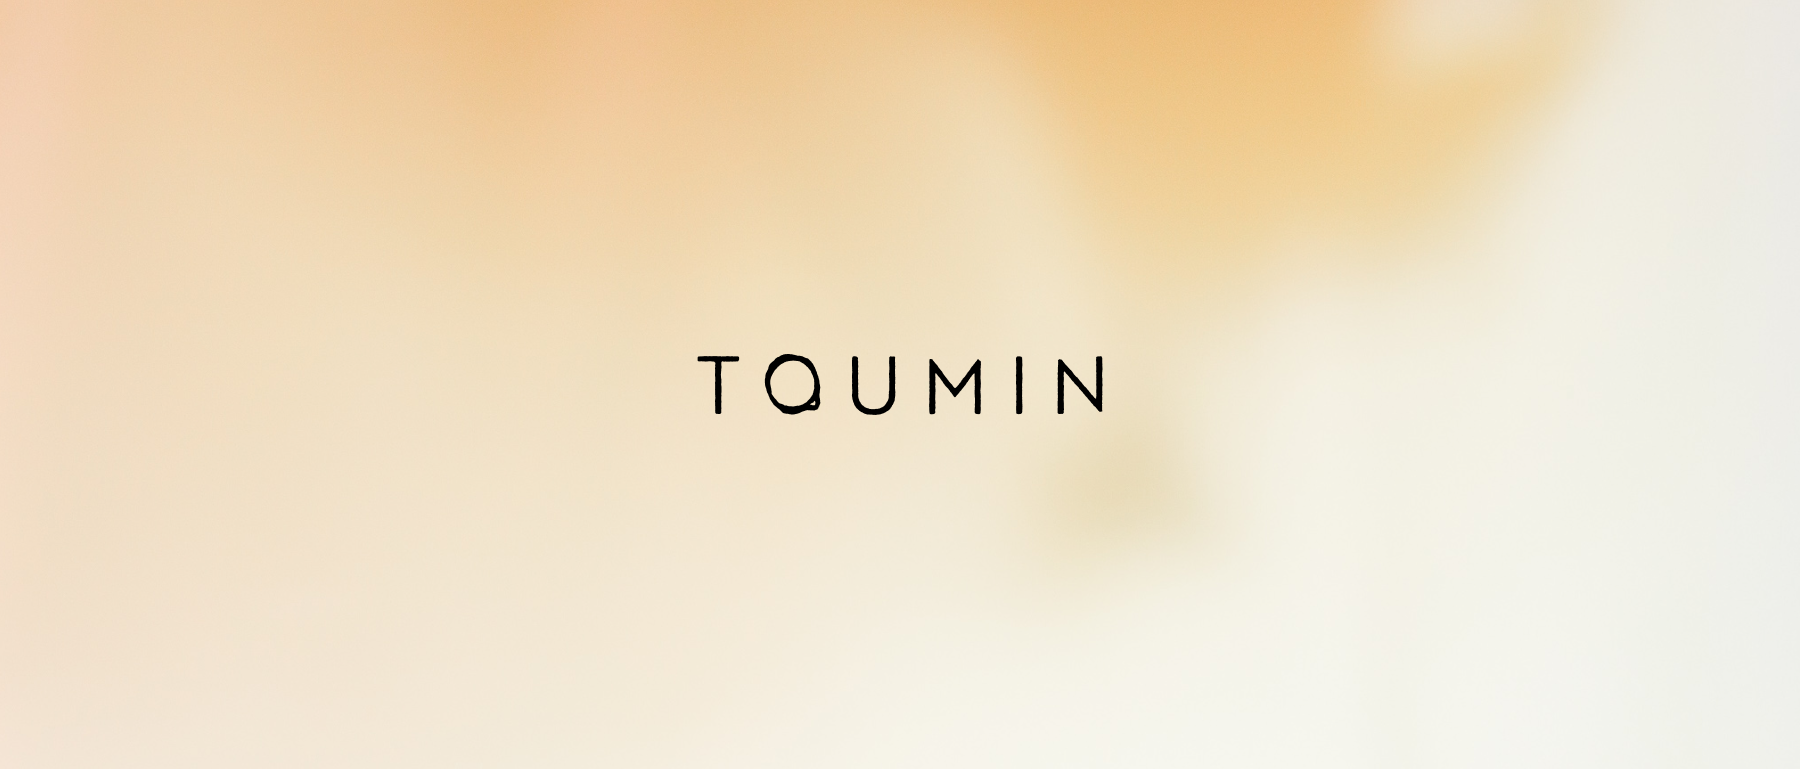 TOUMIN 's images1